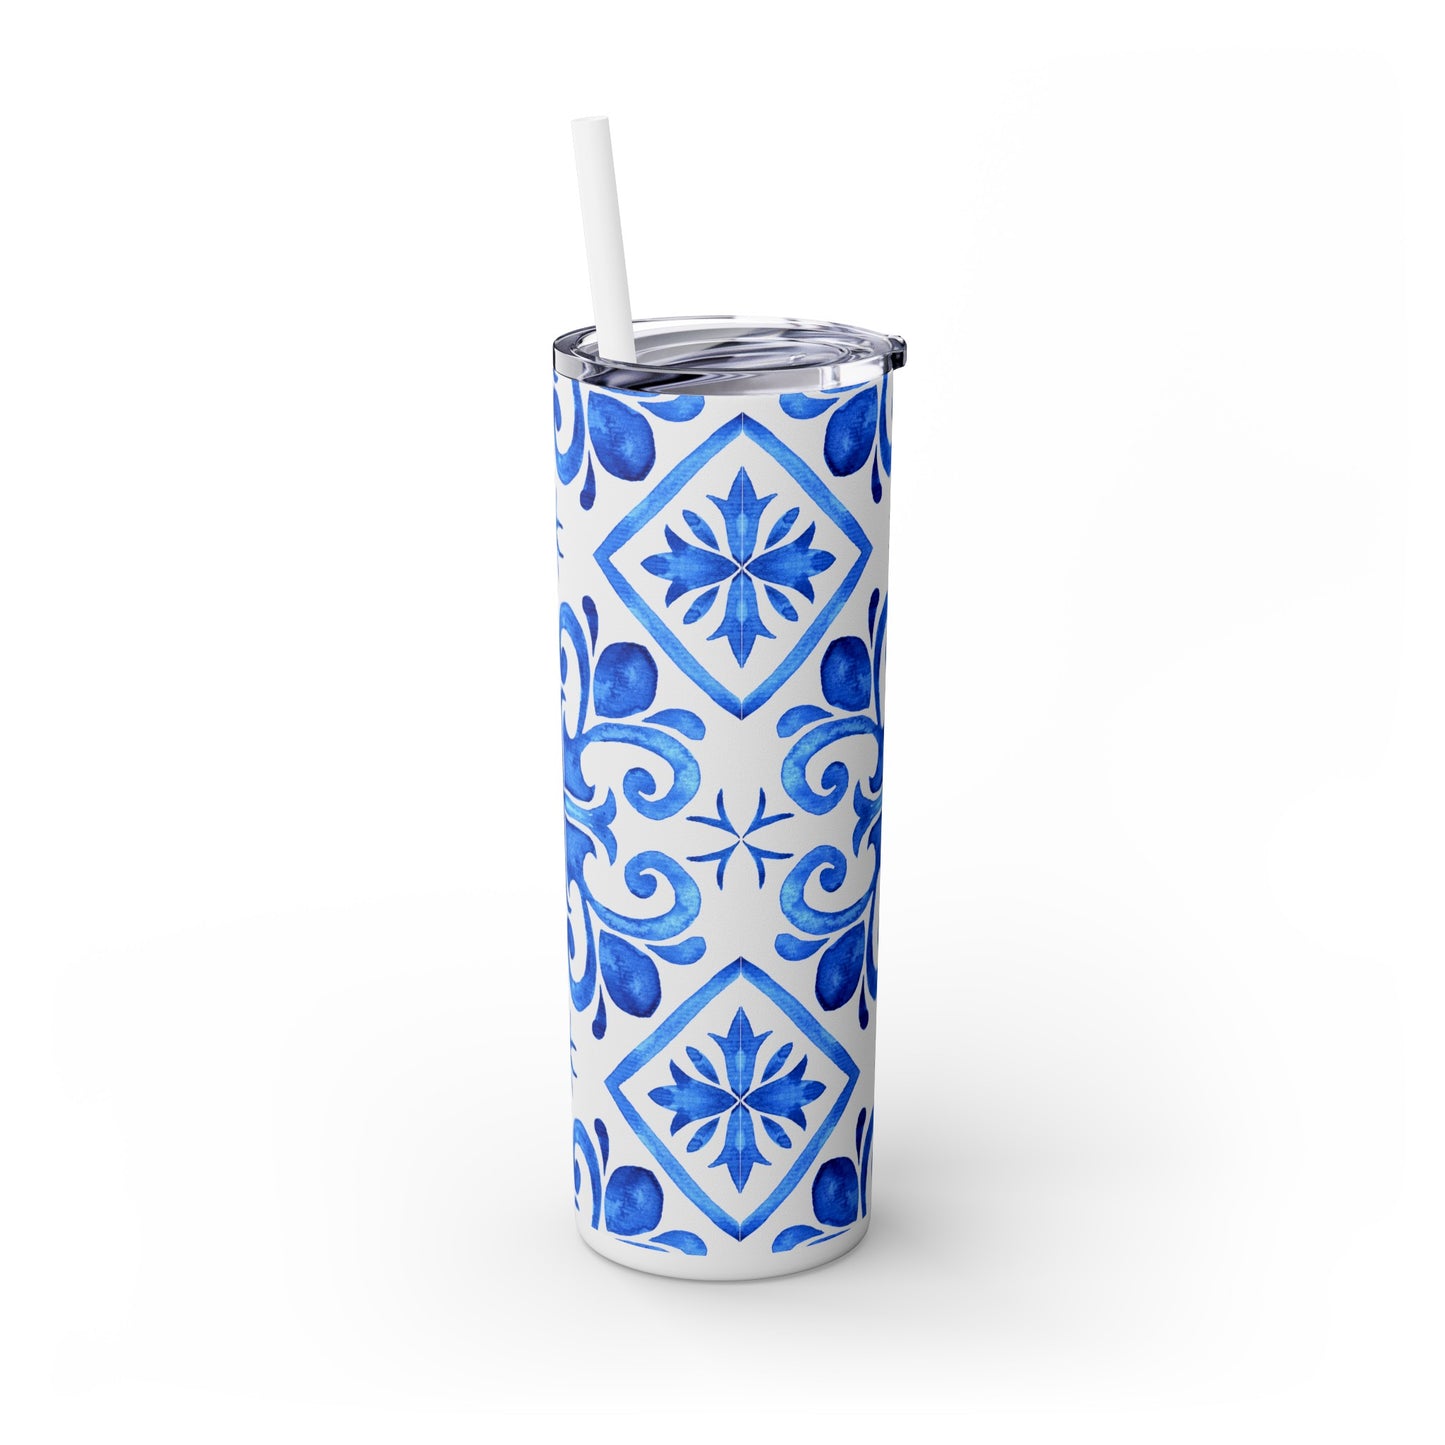 Mediterranean charm Blue and White Skinny Tumbler - 20oz, Keeps Drinks Hot or Cold, Perfect for On-the-Go